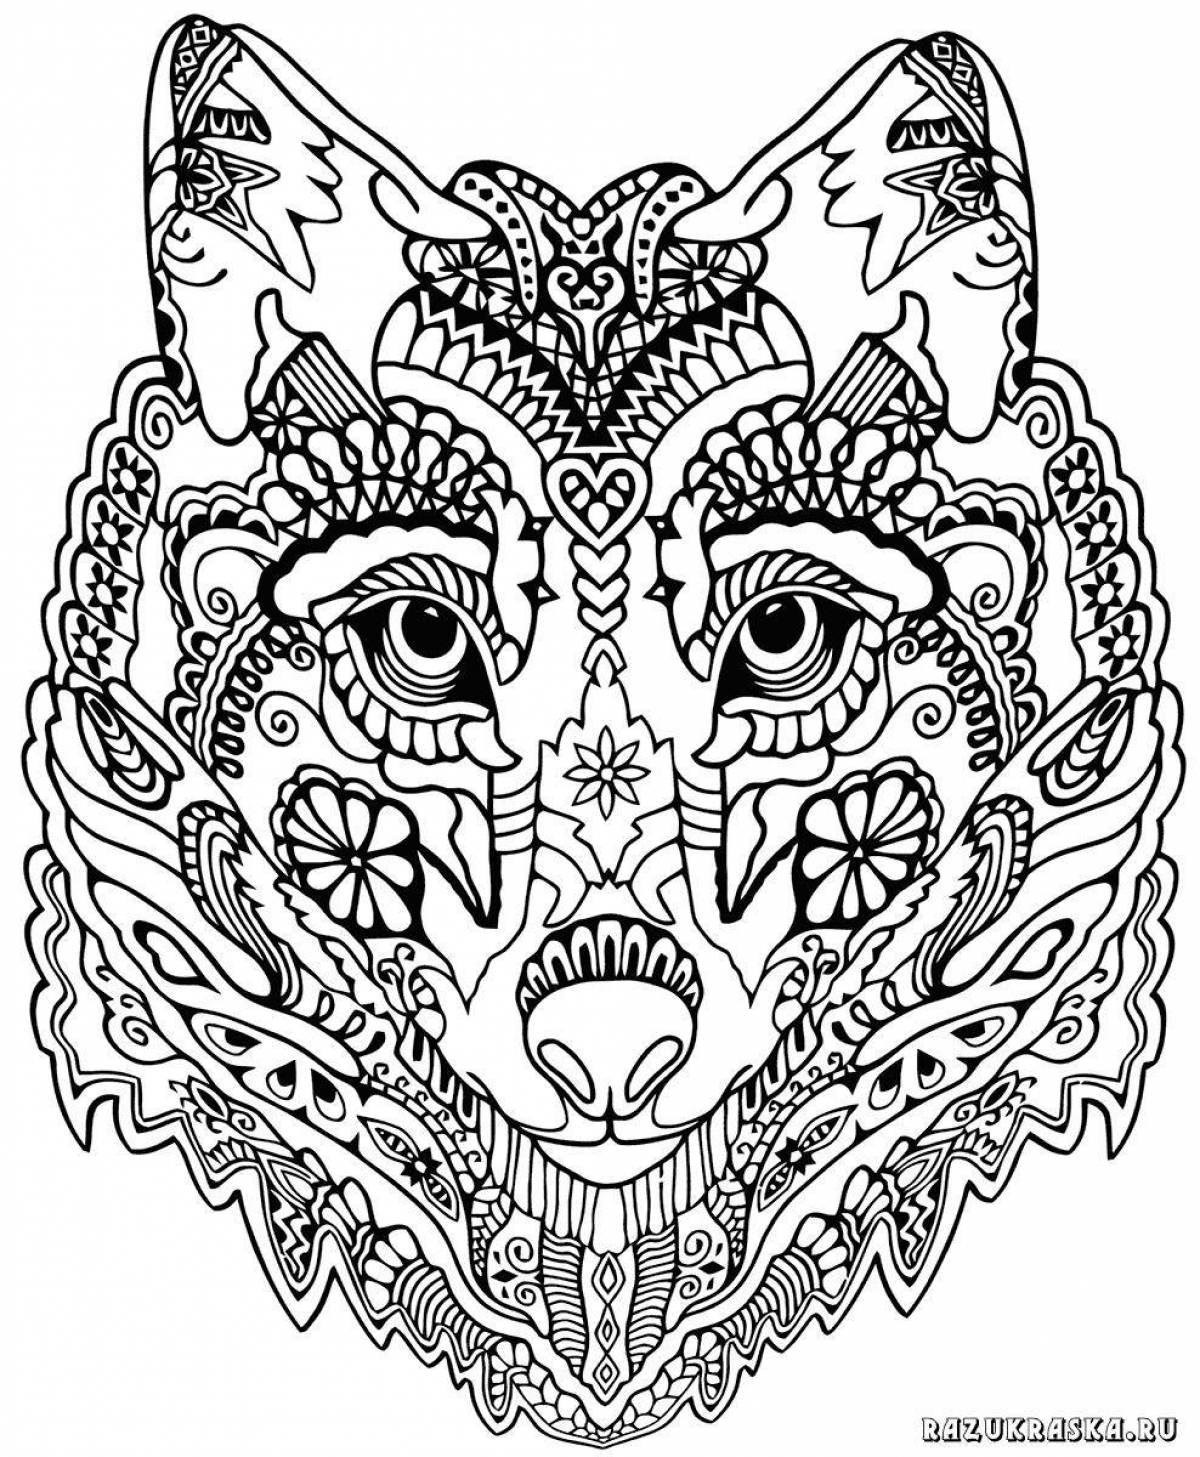 Stimulating stress relief coloring book